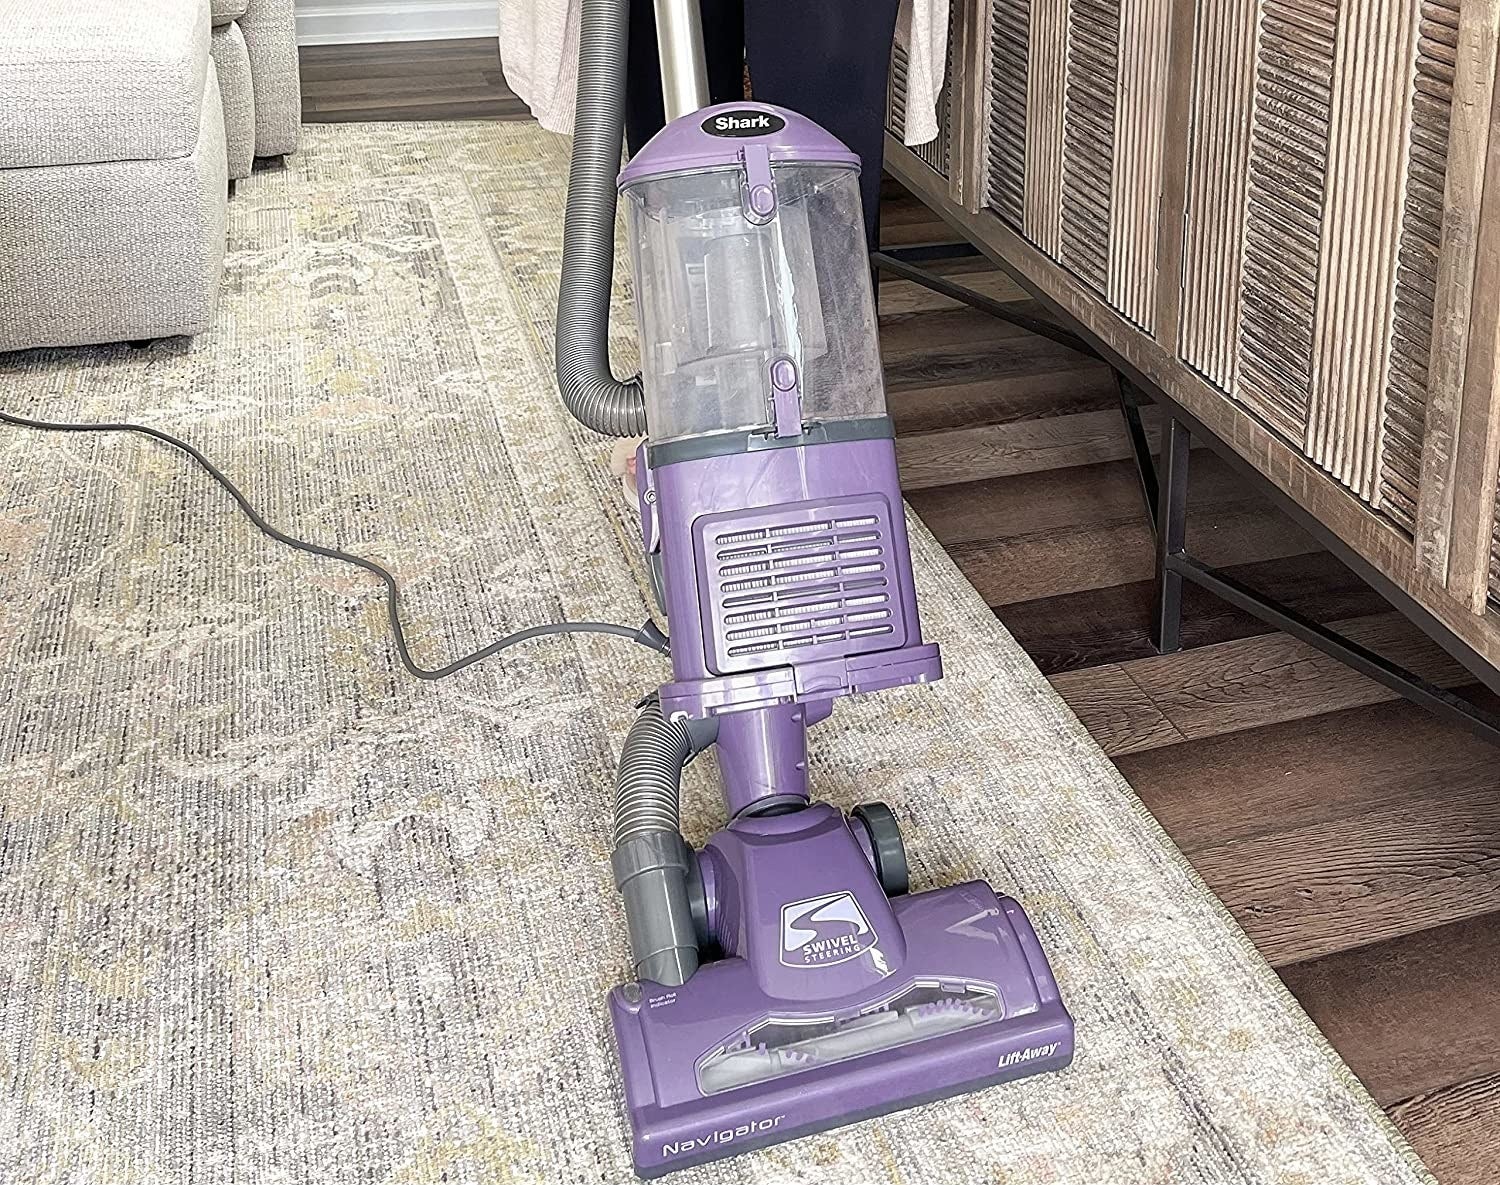 the purple corded vacuum cleaning a rug